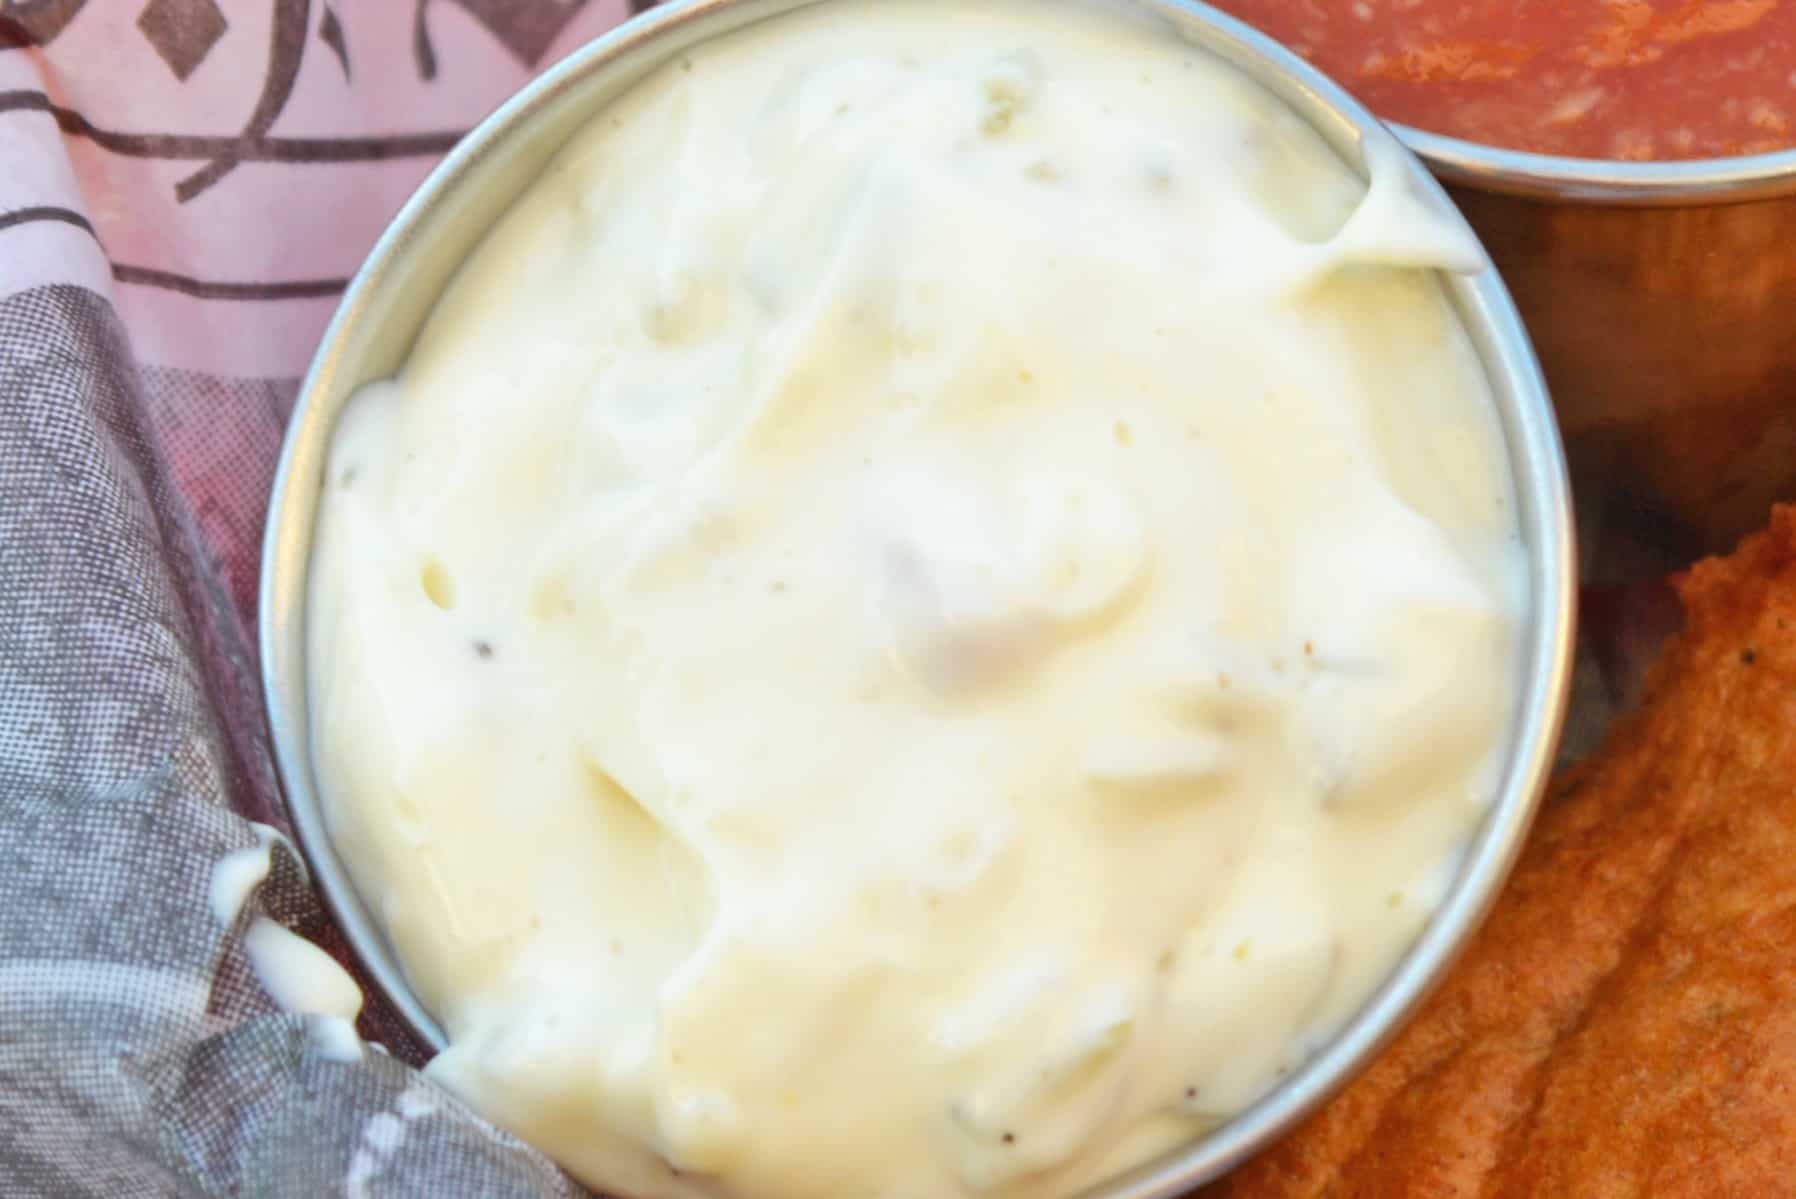 With just 6 main ingredients, this homemade tartar sauce recipe can be made in just minutes. You'll never buy tartar sauce at the store again! #tartarsauce #tartarsaucerecipe #homemadetartarsauce www.savoryexperiments.com